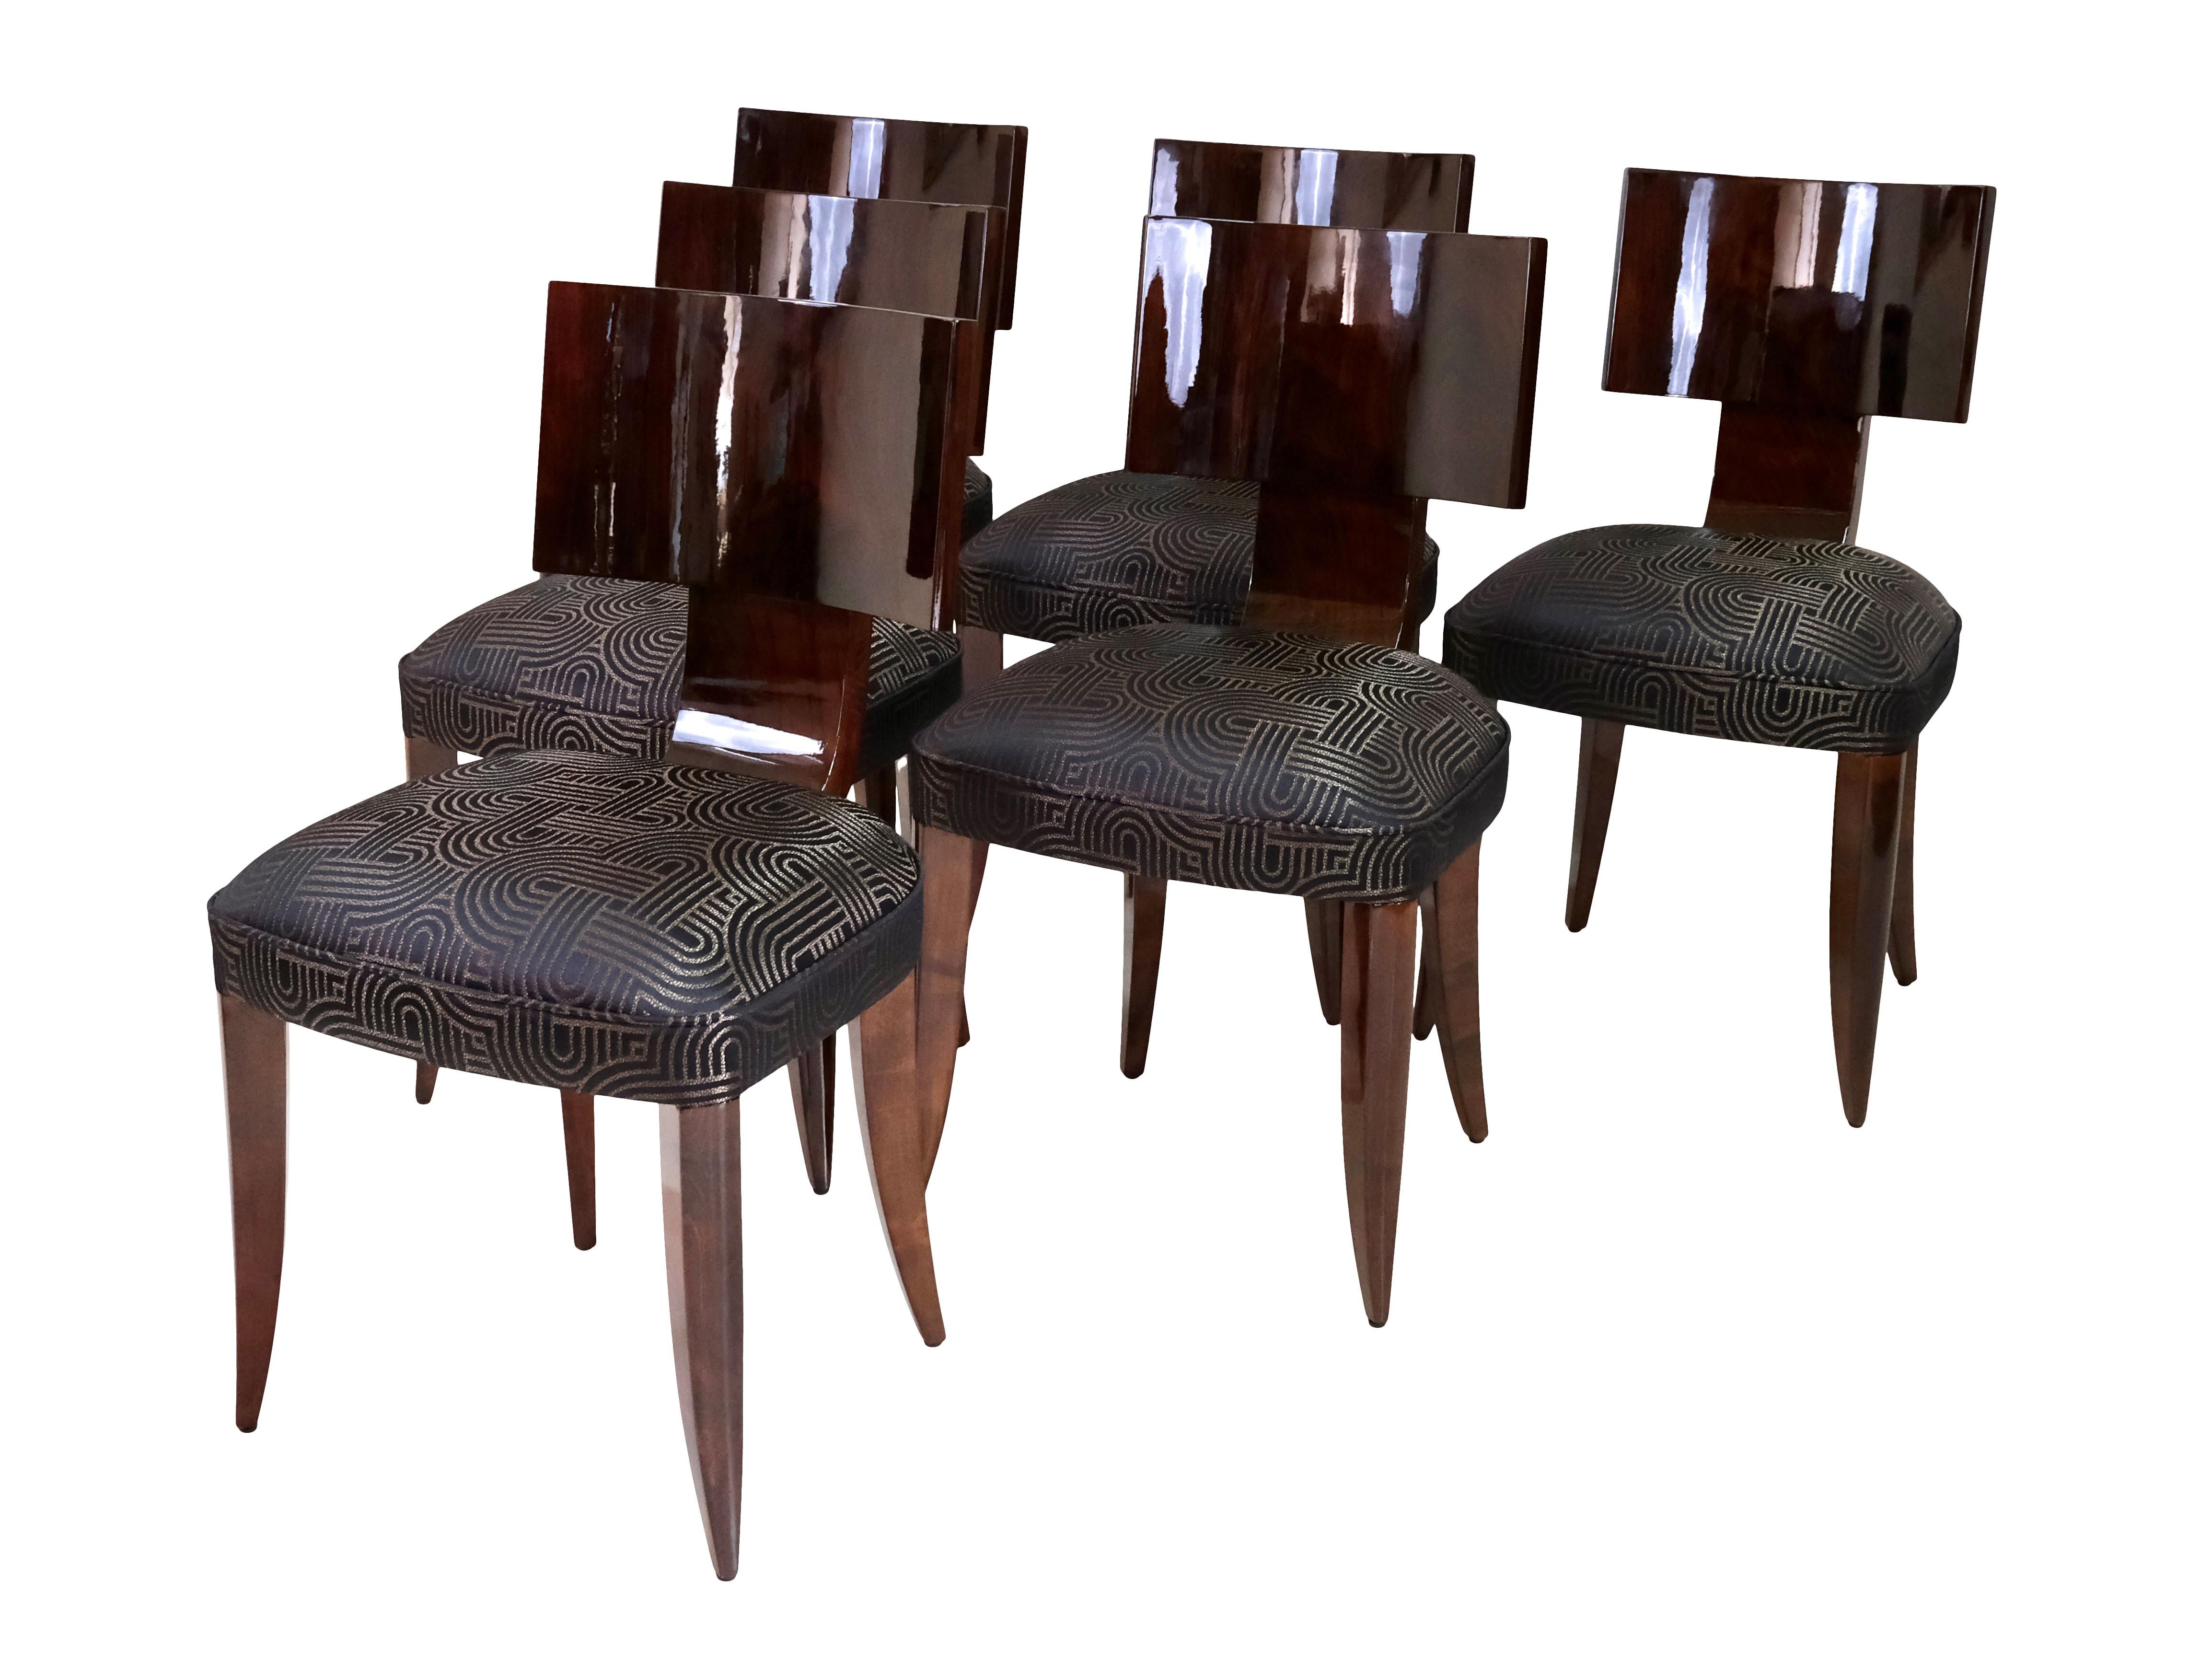 Six Modernist Art Deco Dining Chairs from 1930s France 5